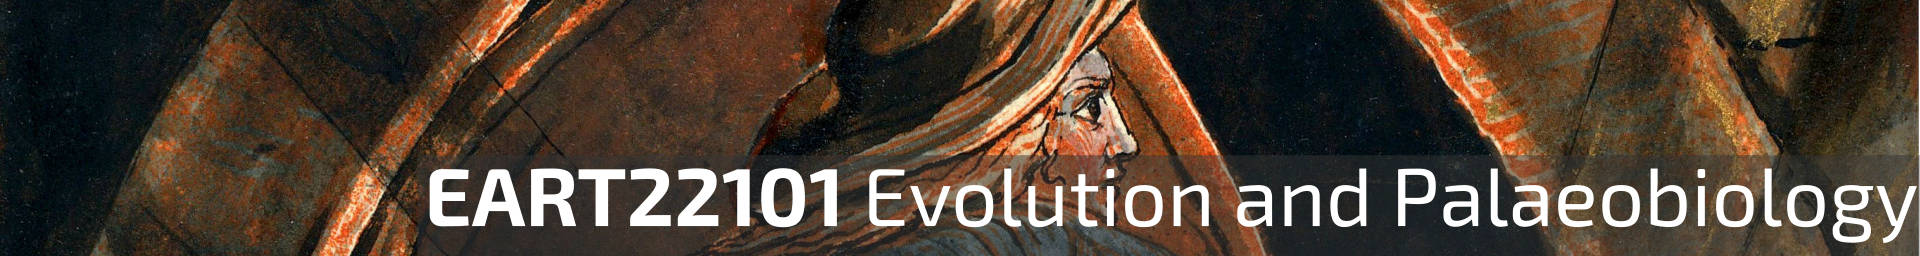 Link to course on Evolution and Palaeobiology